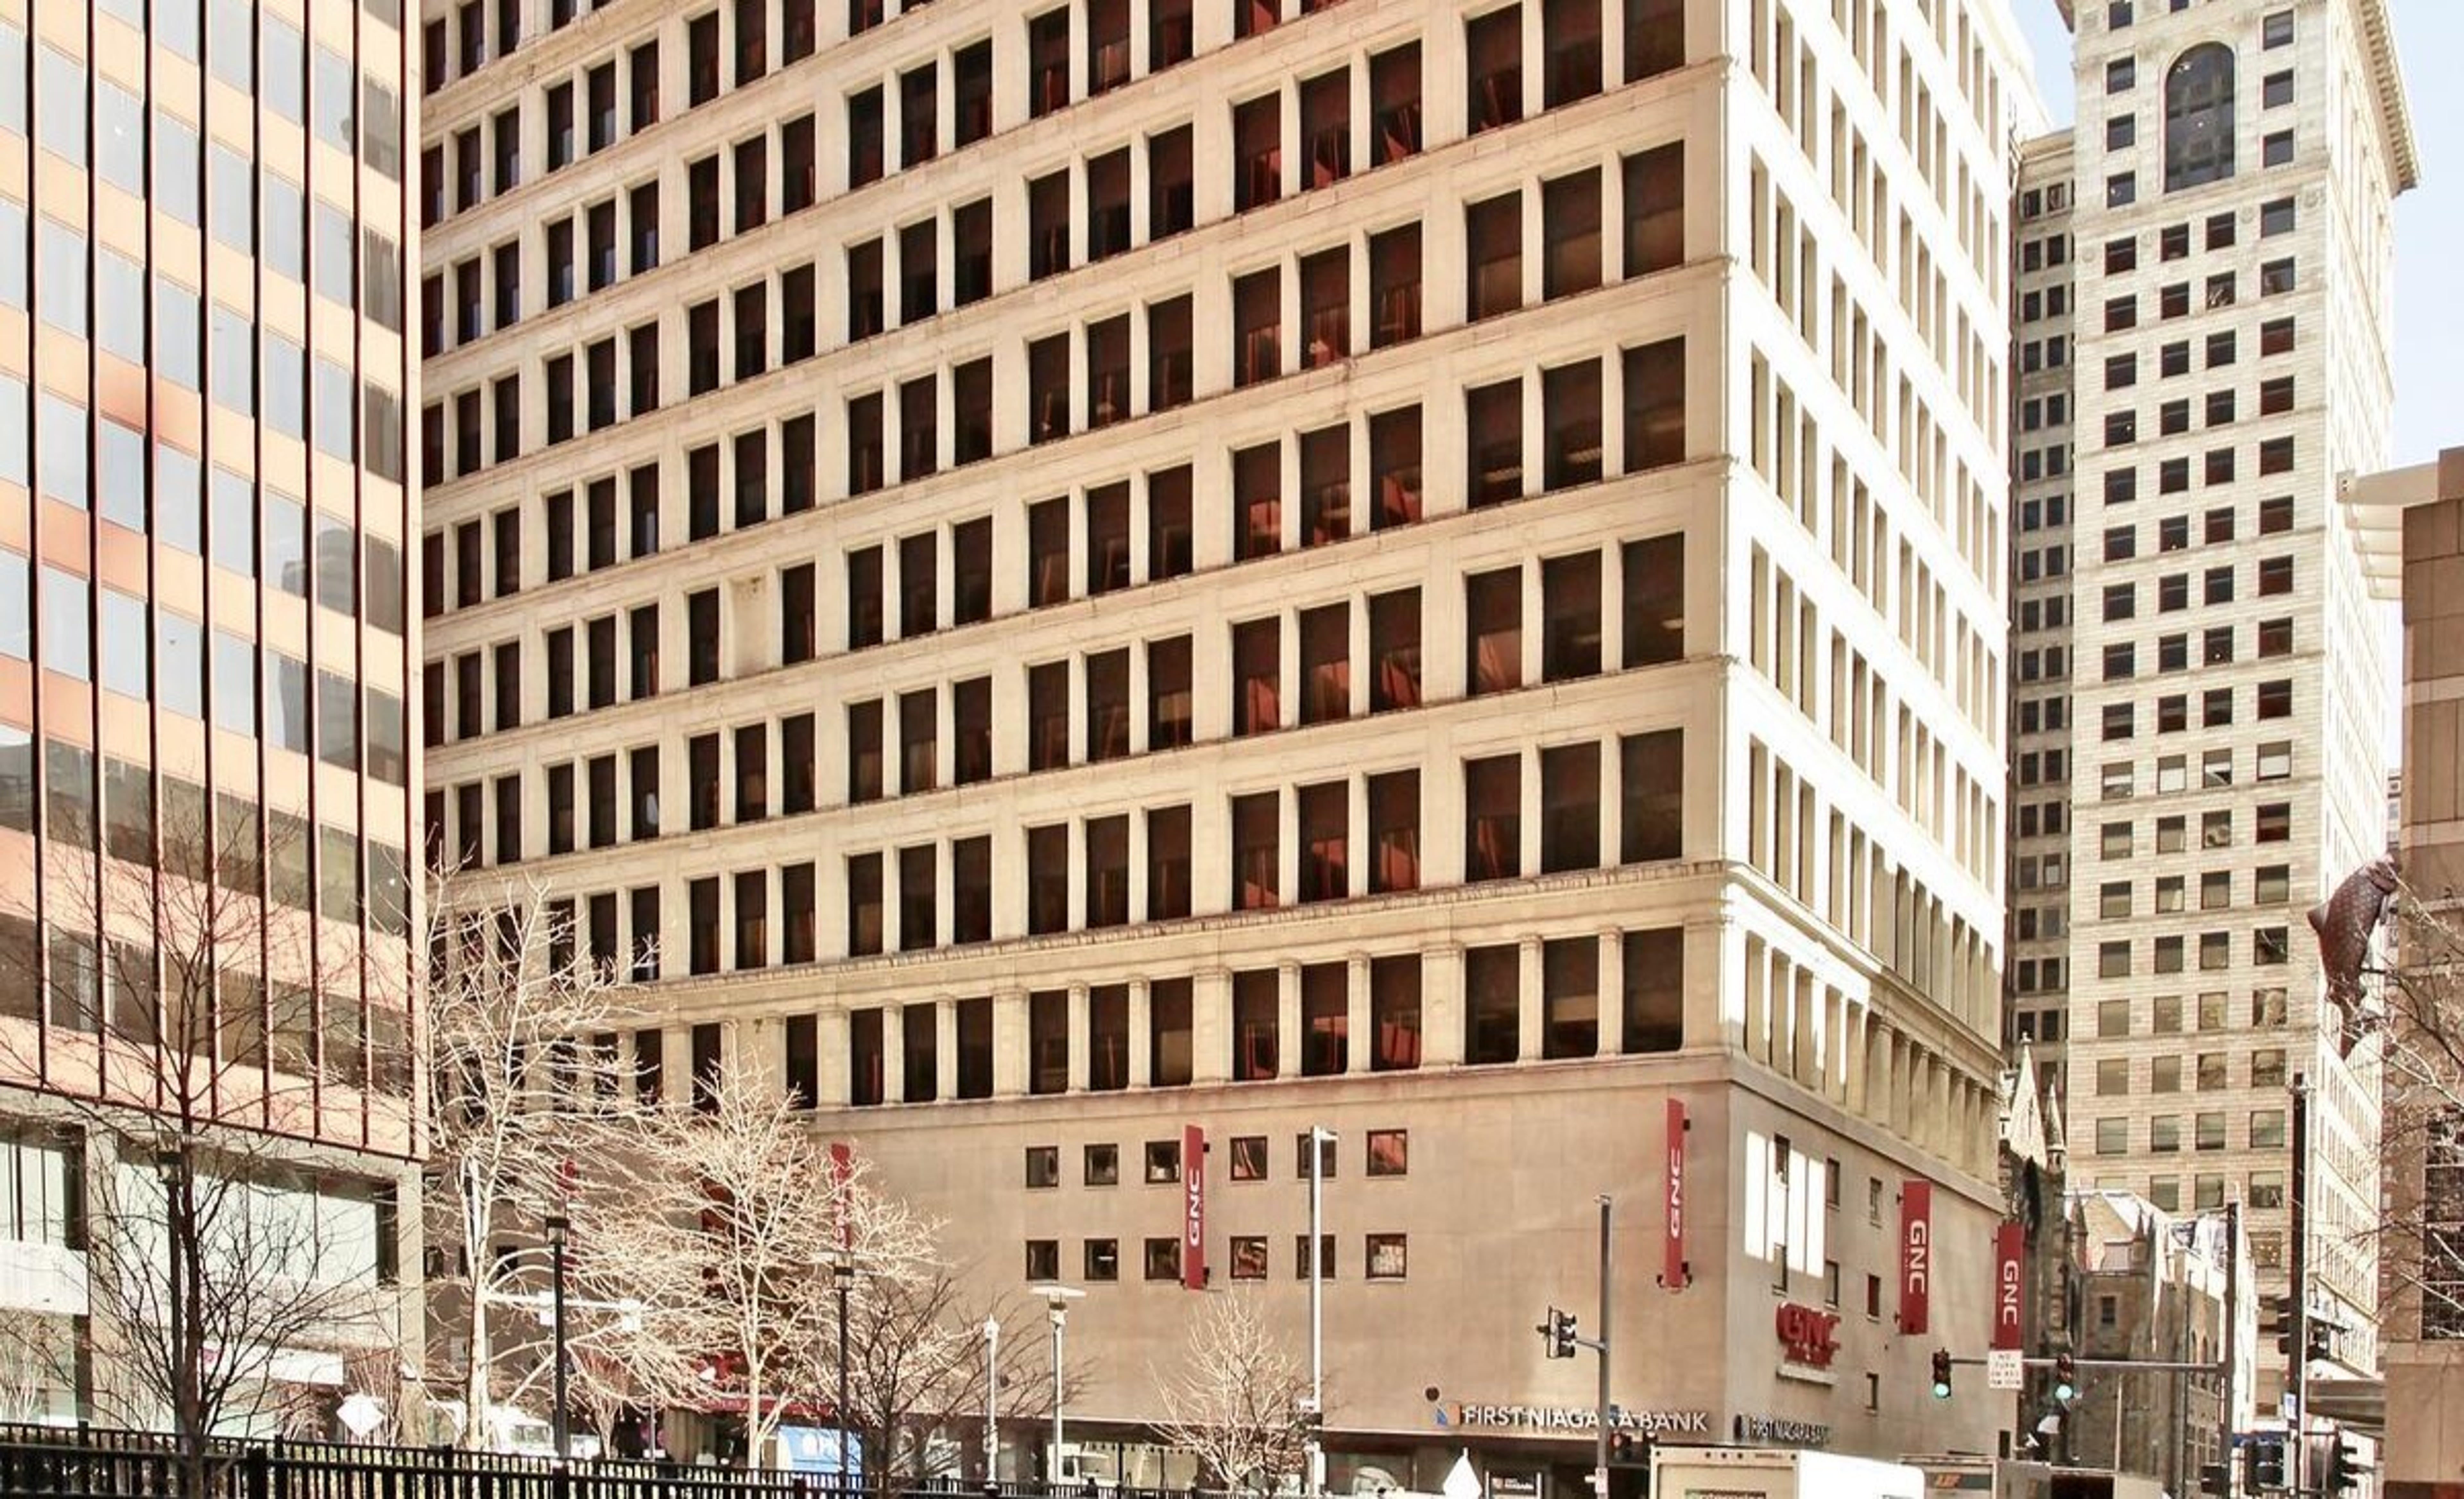 Private Market Real Estate Offering Announced For Mixed-Use Redevelopment In Downtown Pittsburgh